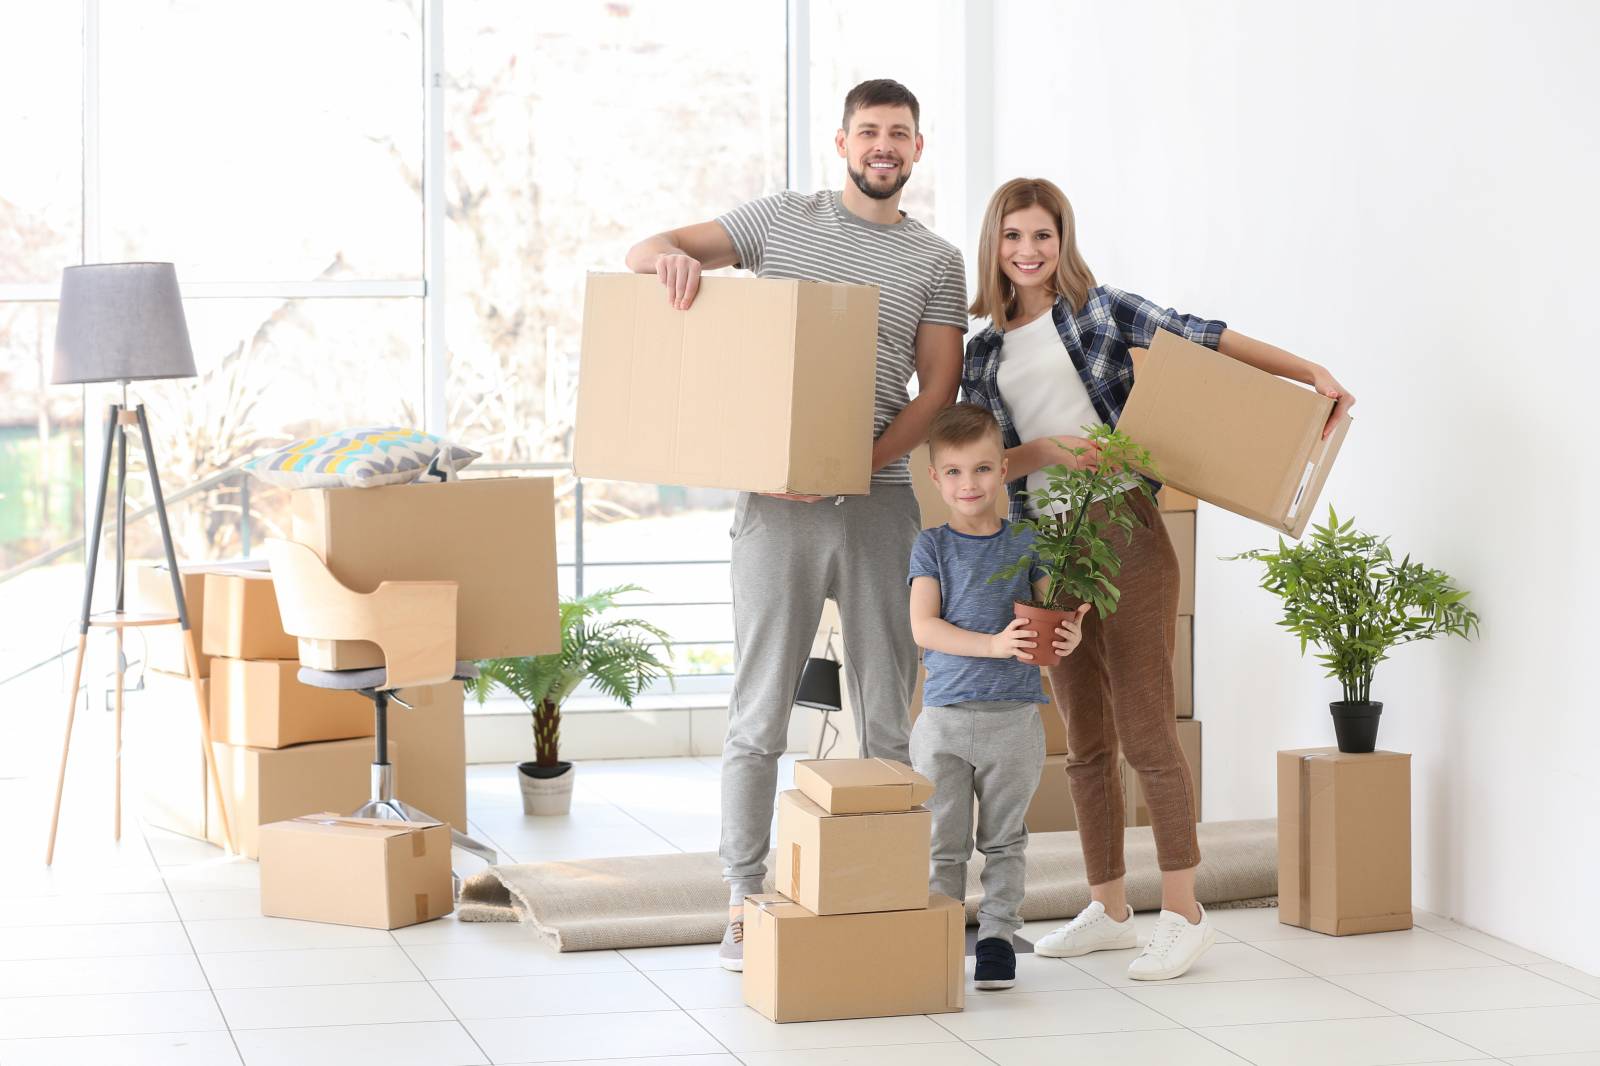 5 REASONS TO CHOOSE REMOVALS SERVICE